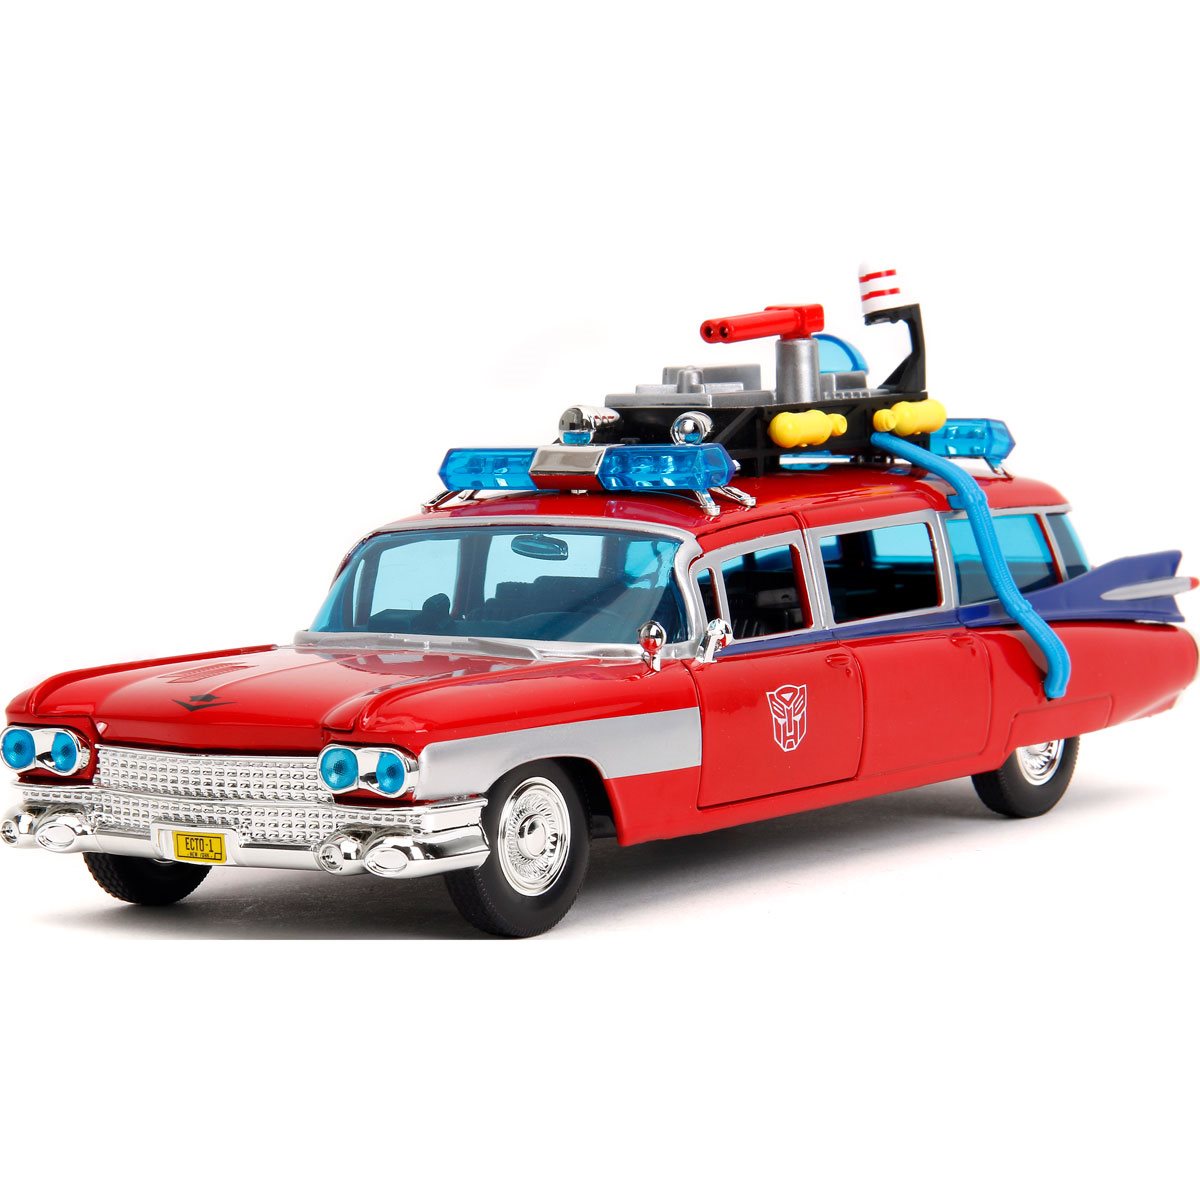 Ghostbusters x Transformers Hollywood Rides Ecto-1 (Optimus Prime Deco) 1:24 Scale Diecast Vehicle